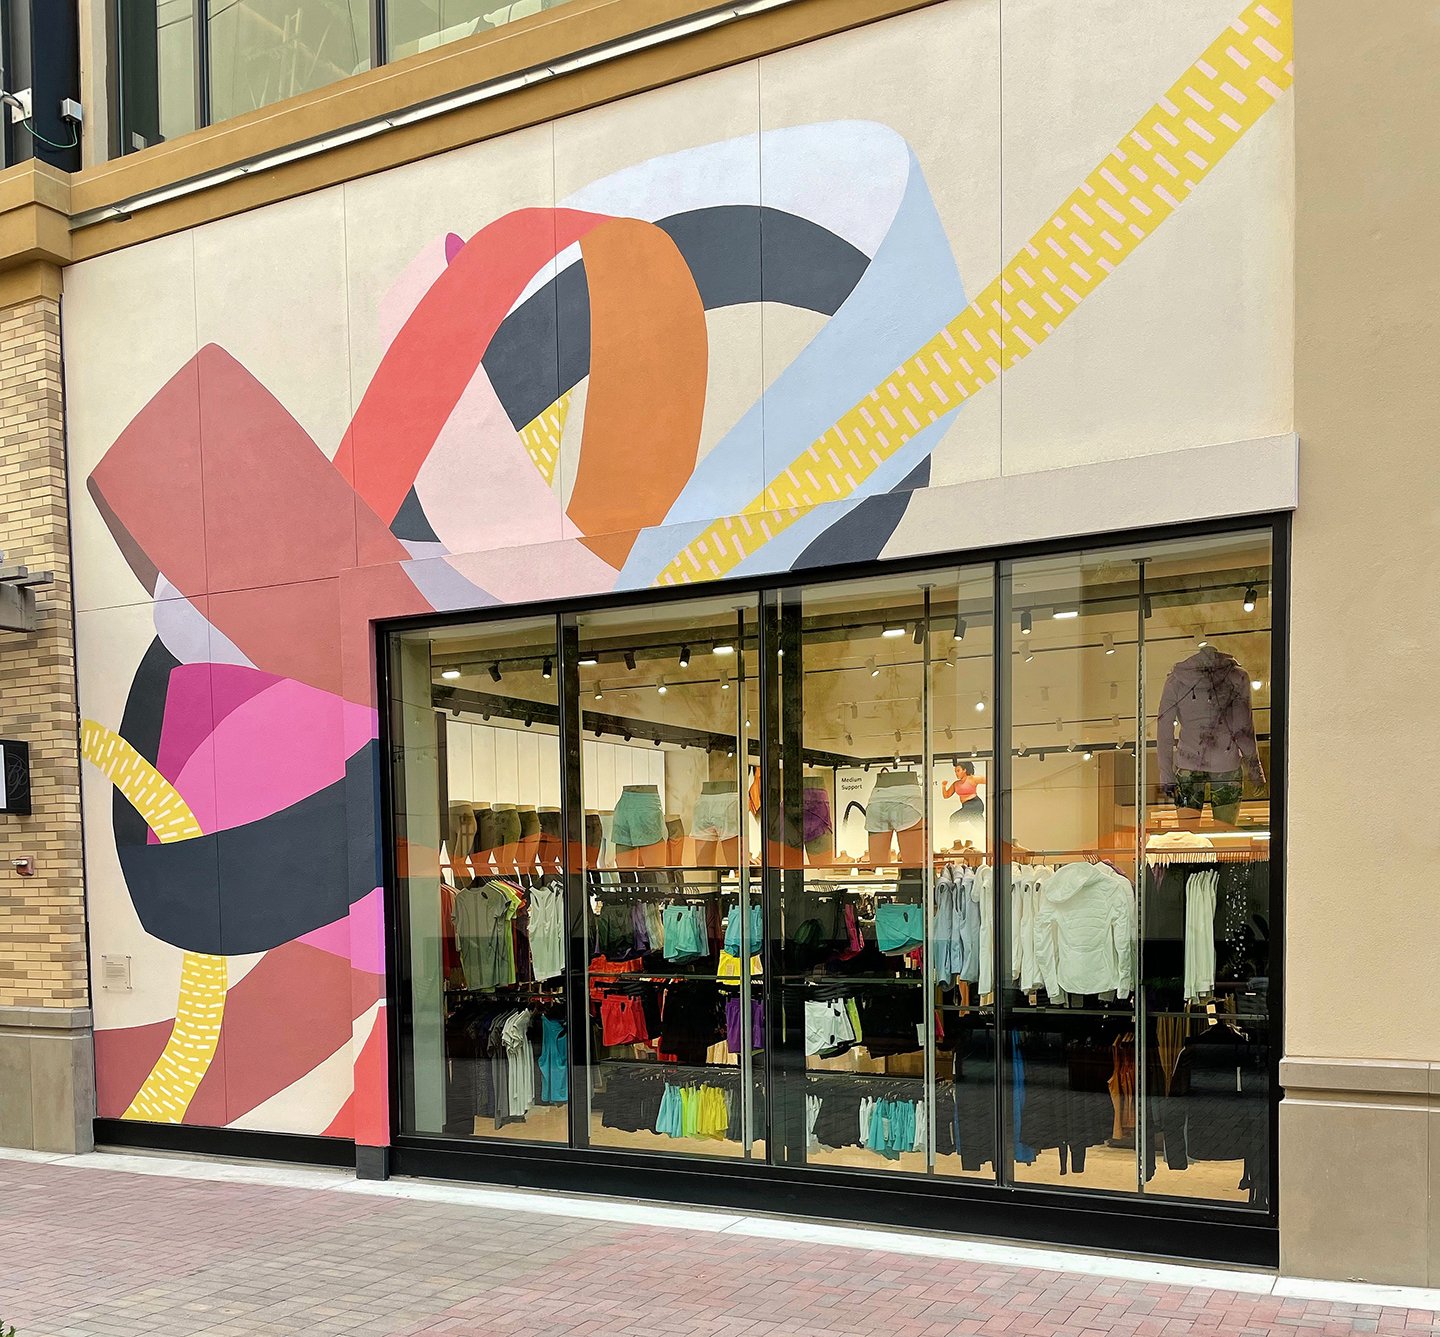  Unfurl, mural for Lululemon, 2022 22 x 28 feet Acrylic paint Broadway Plaza Walnut Creek, CA  Undulating forms loop, curve, arch, stretch, and unfurl. Viewers are invited directly into the traces of movement to feel a burst of energy, dynamism, and 